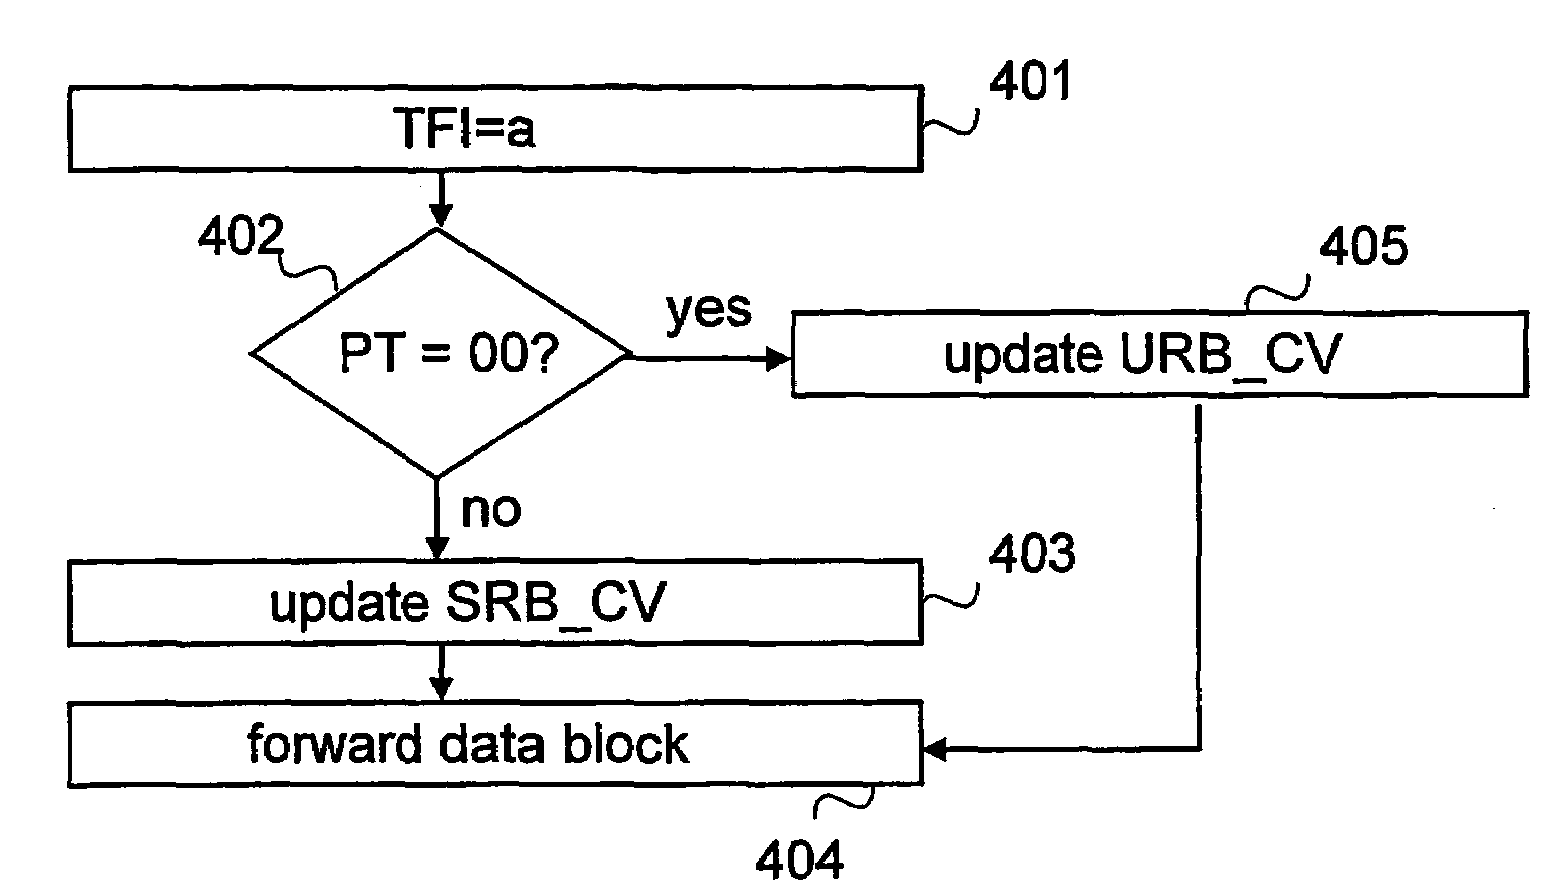 Informing network about amount of data to be transferred